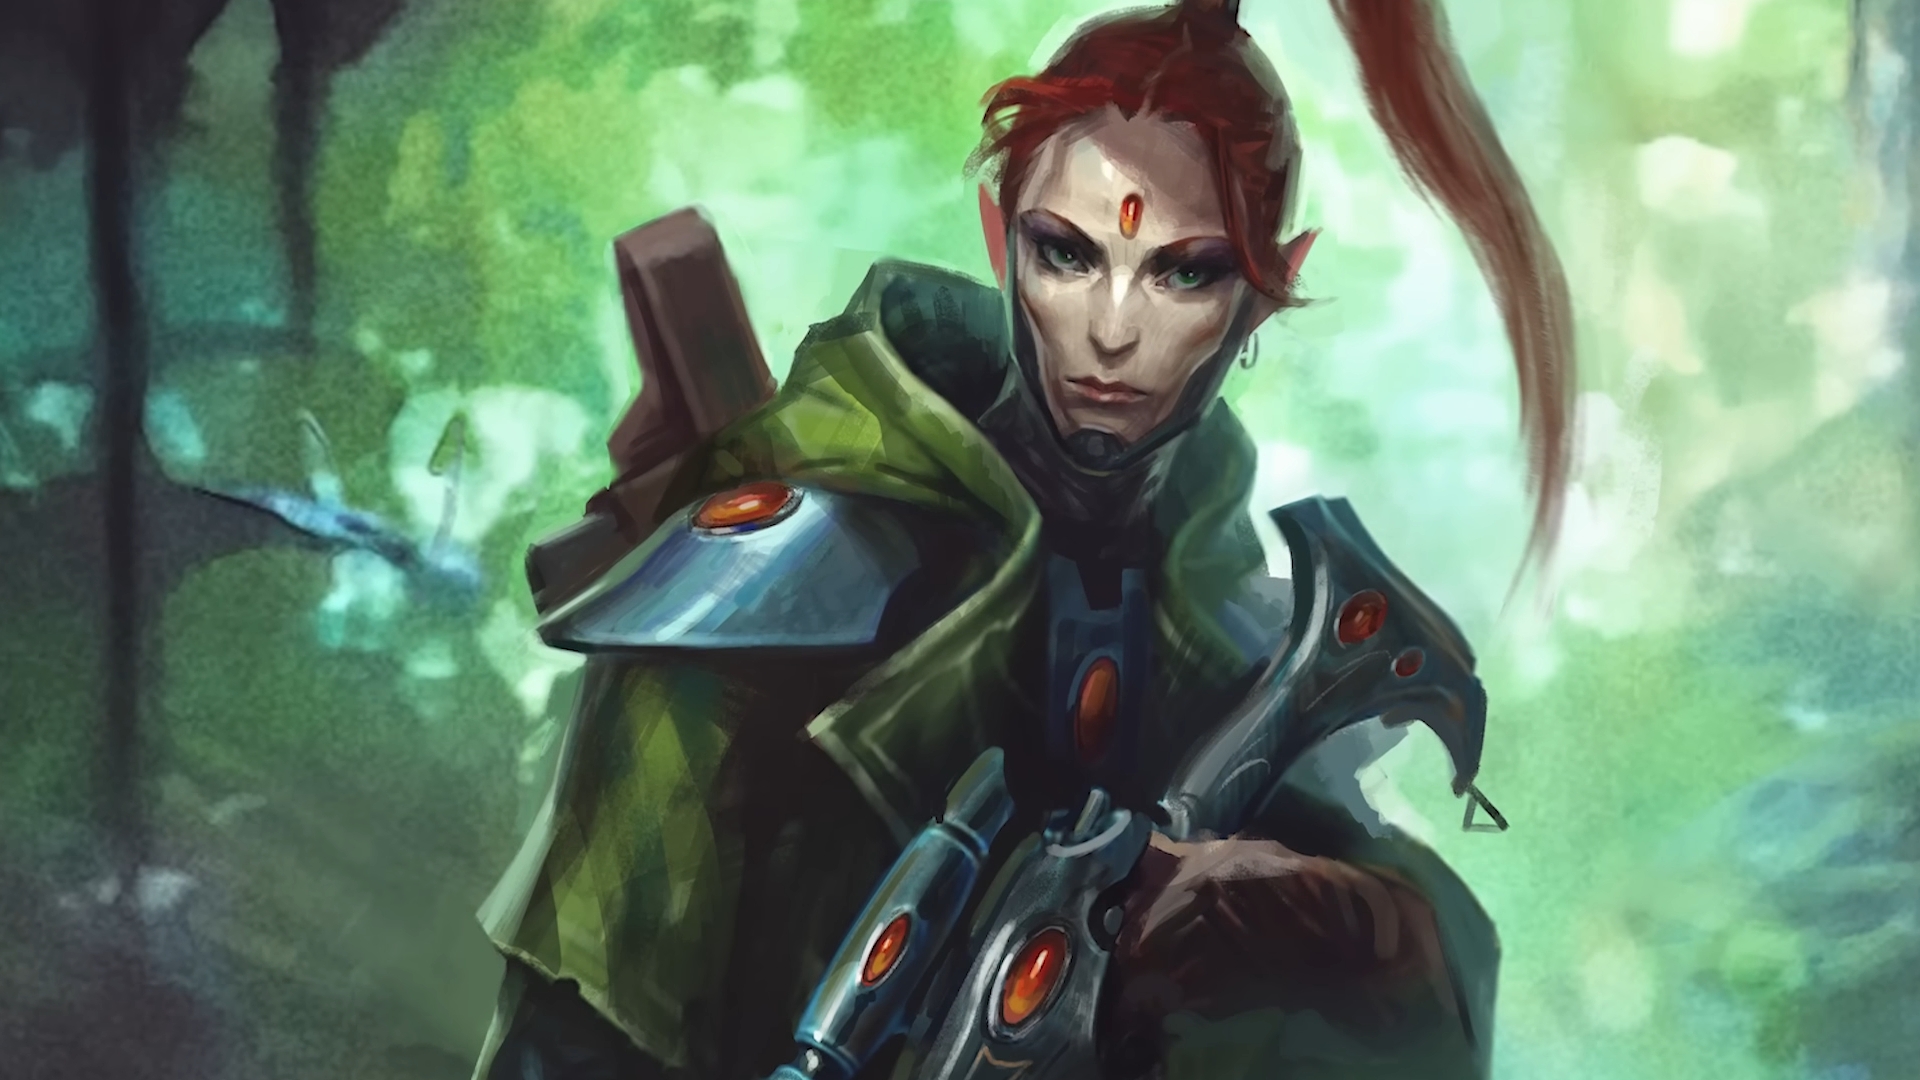 Owlcat gives a first look at Warhammer 000: Rogue Trader and some of its companions